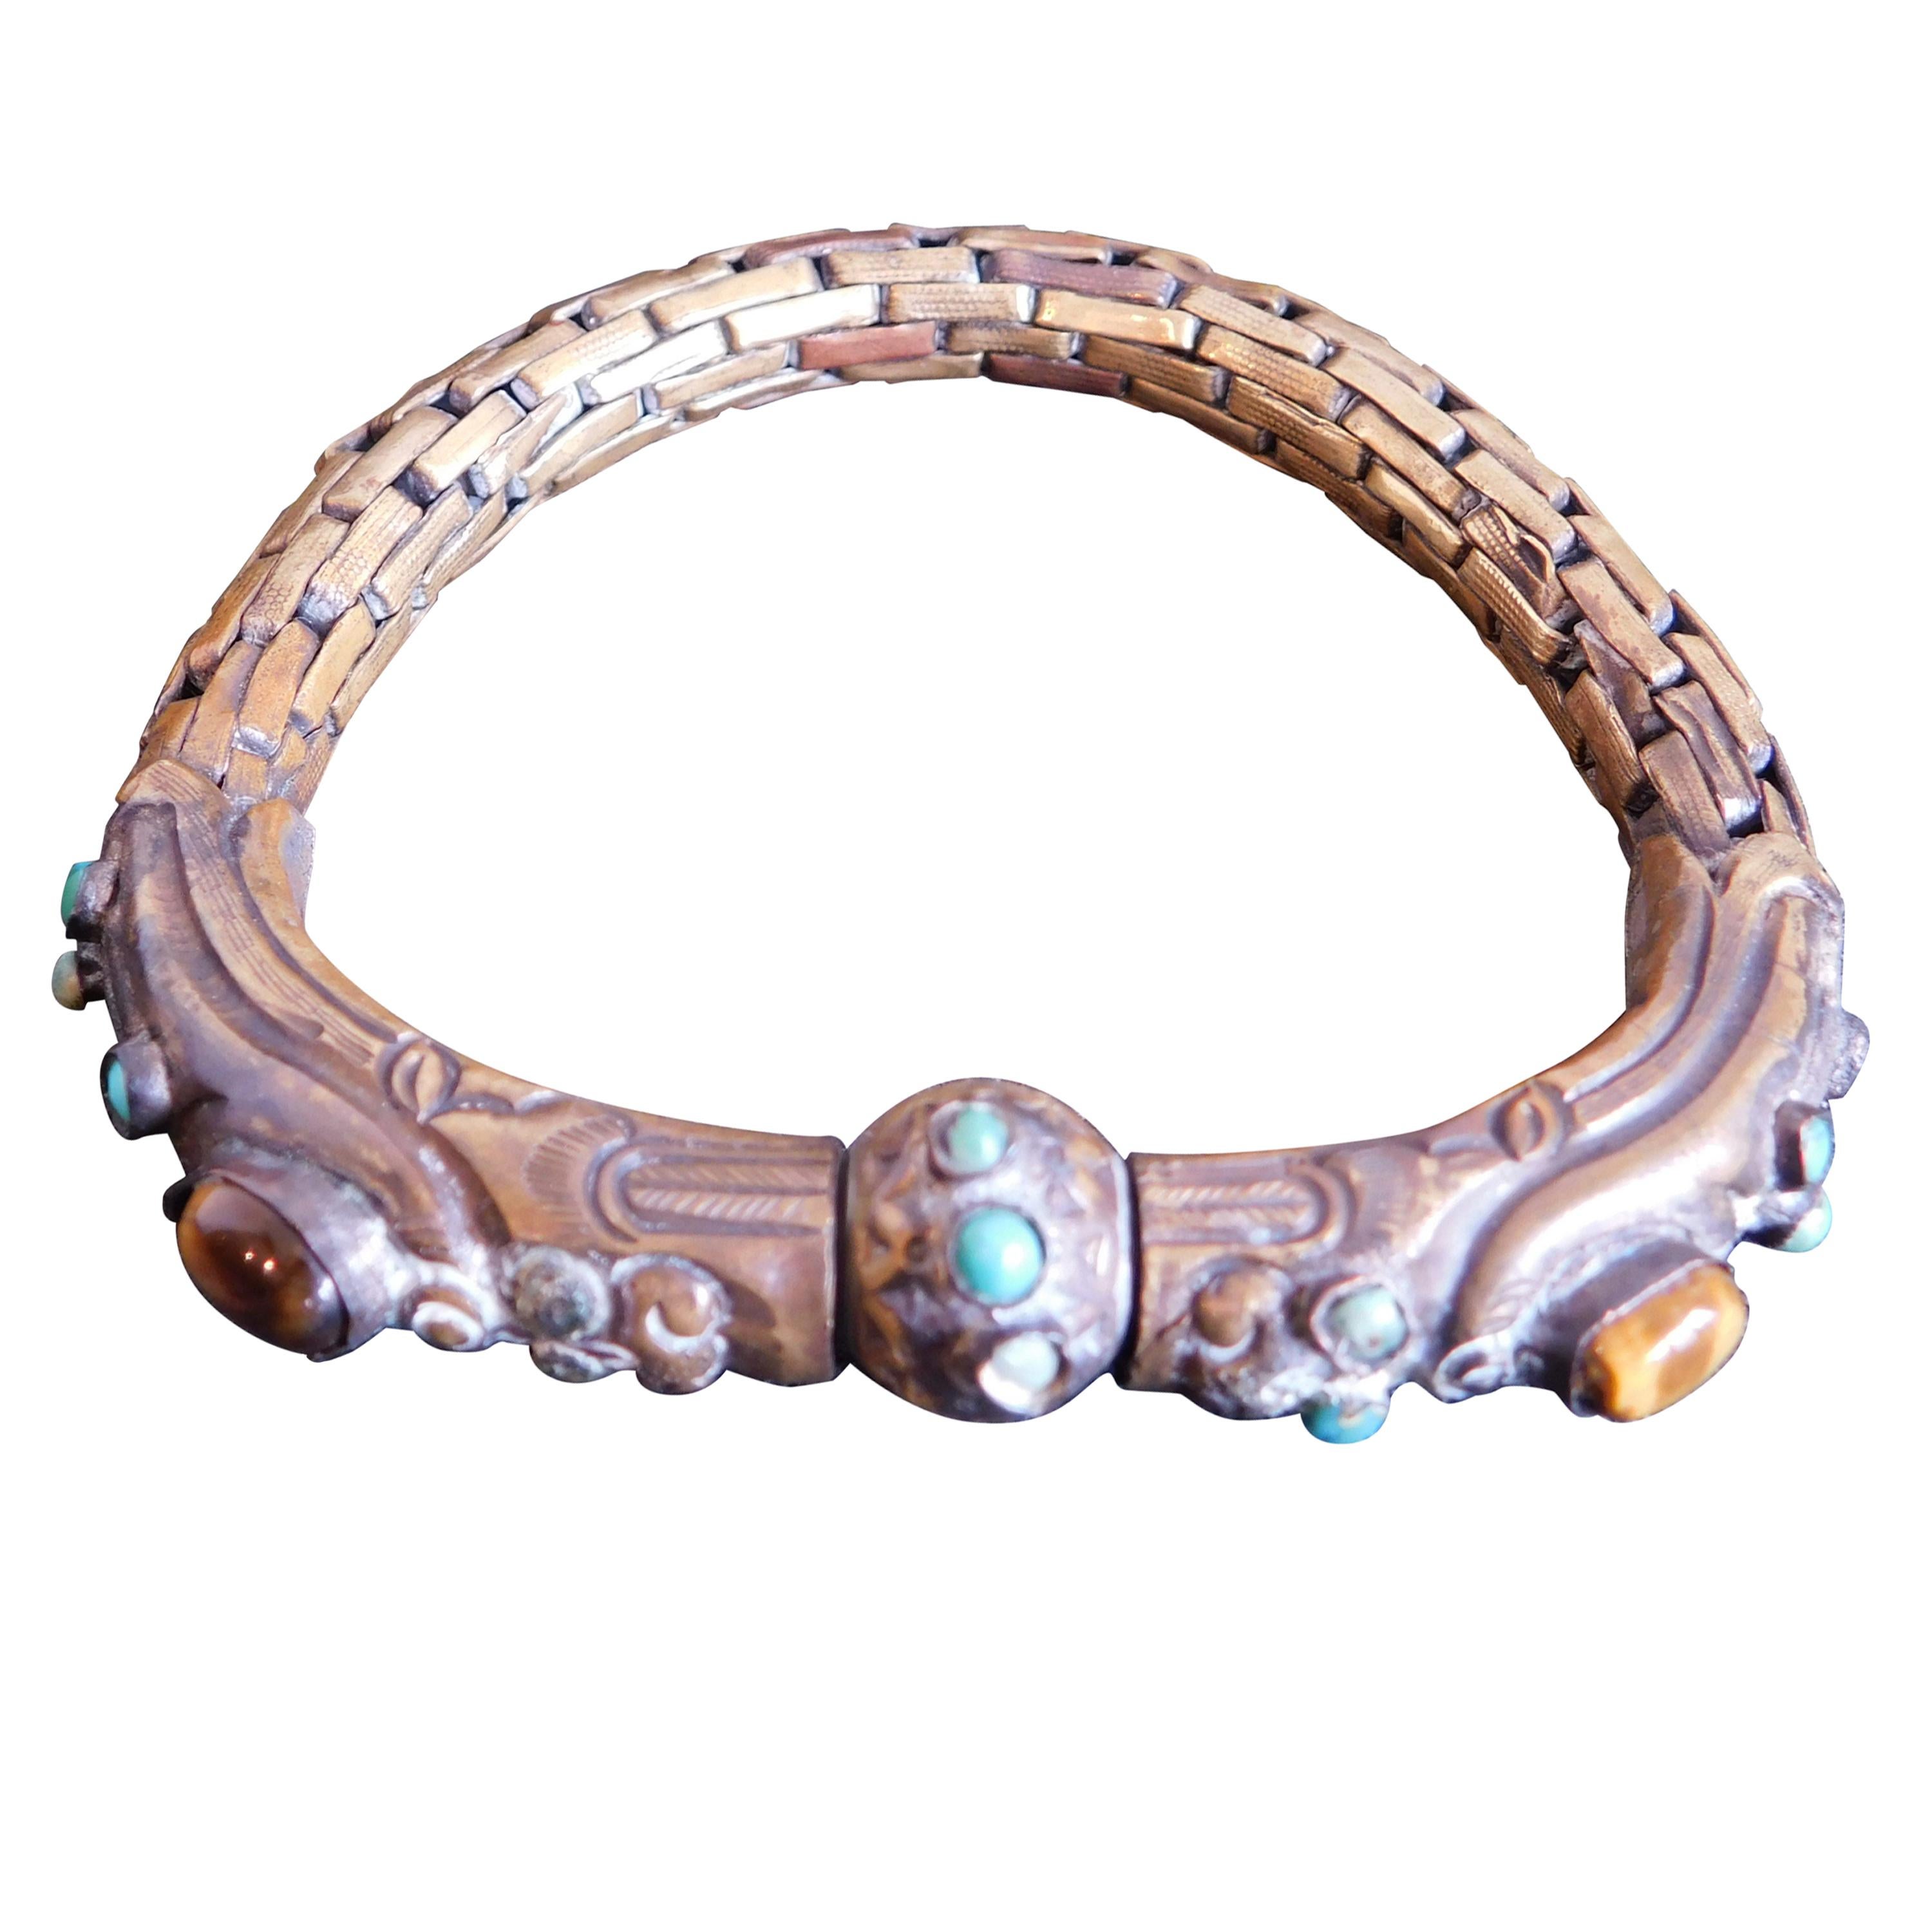 Antique Chinese Brass Bracelet with Turquoise and Tiger Eye Bezel Set Stones. For Sale